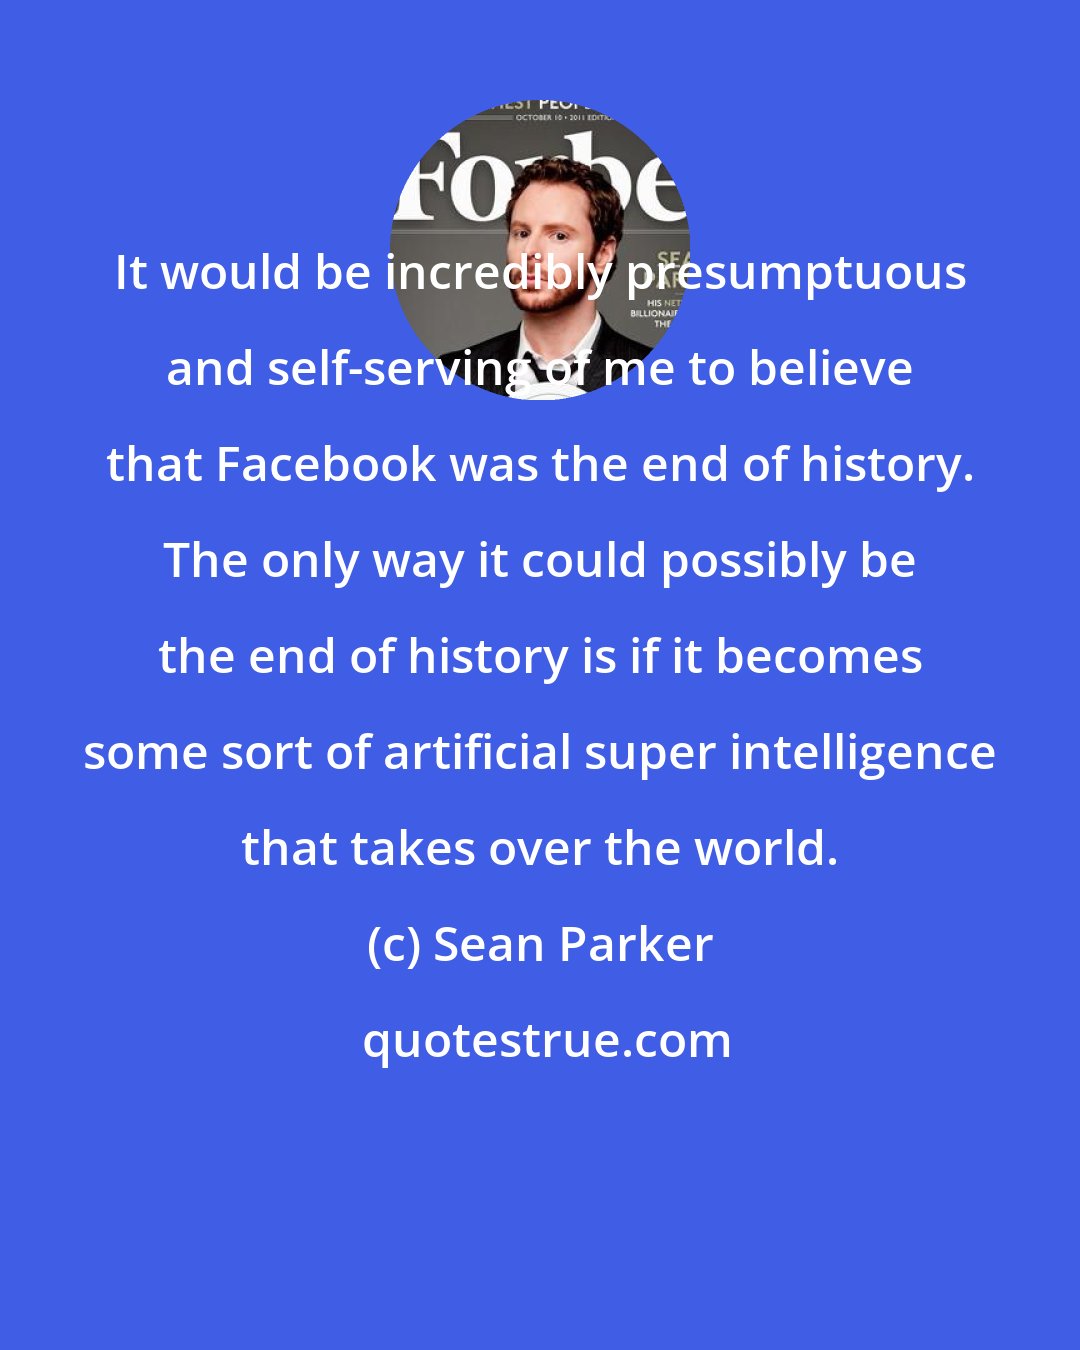 Sean Parker: It would be incredibly presumptuous and self-serving of me to believe that Facebook was the end of history. The only way it could possibly be the end of history is if it becomes some sort of artificial super intelligence that takes over the world.